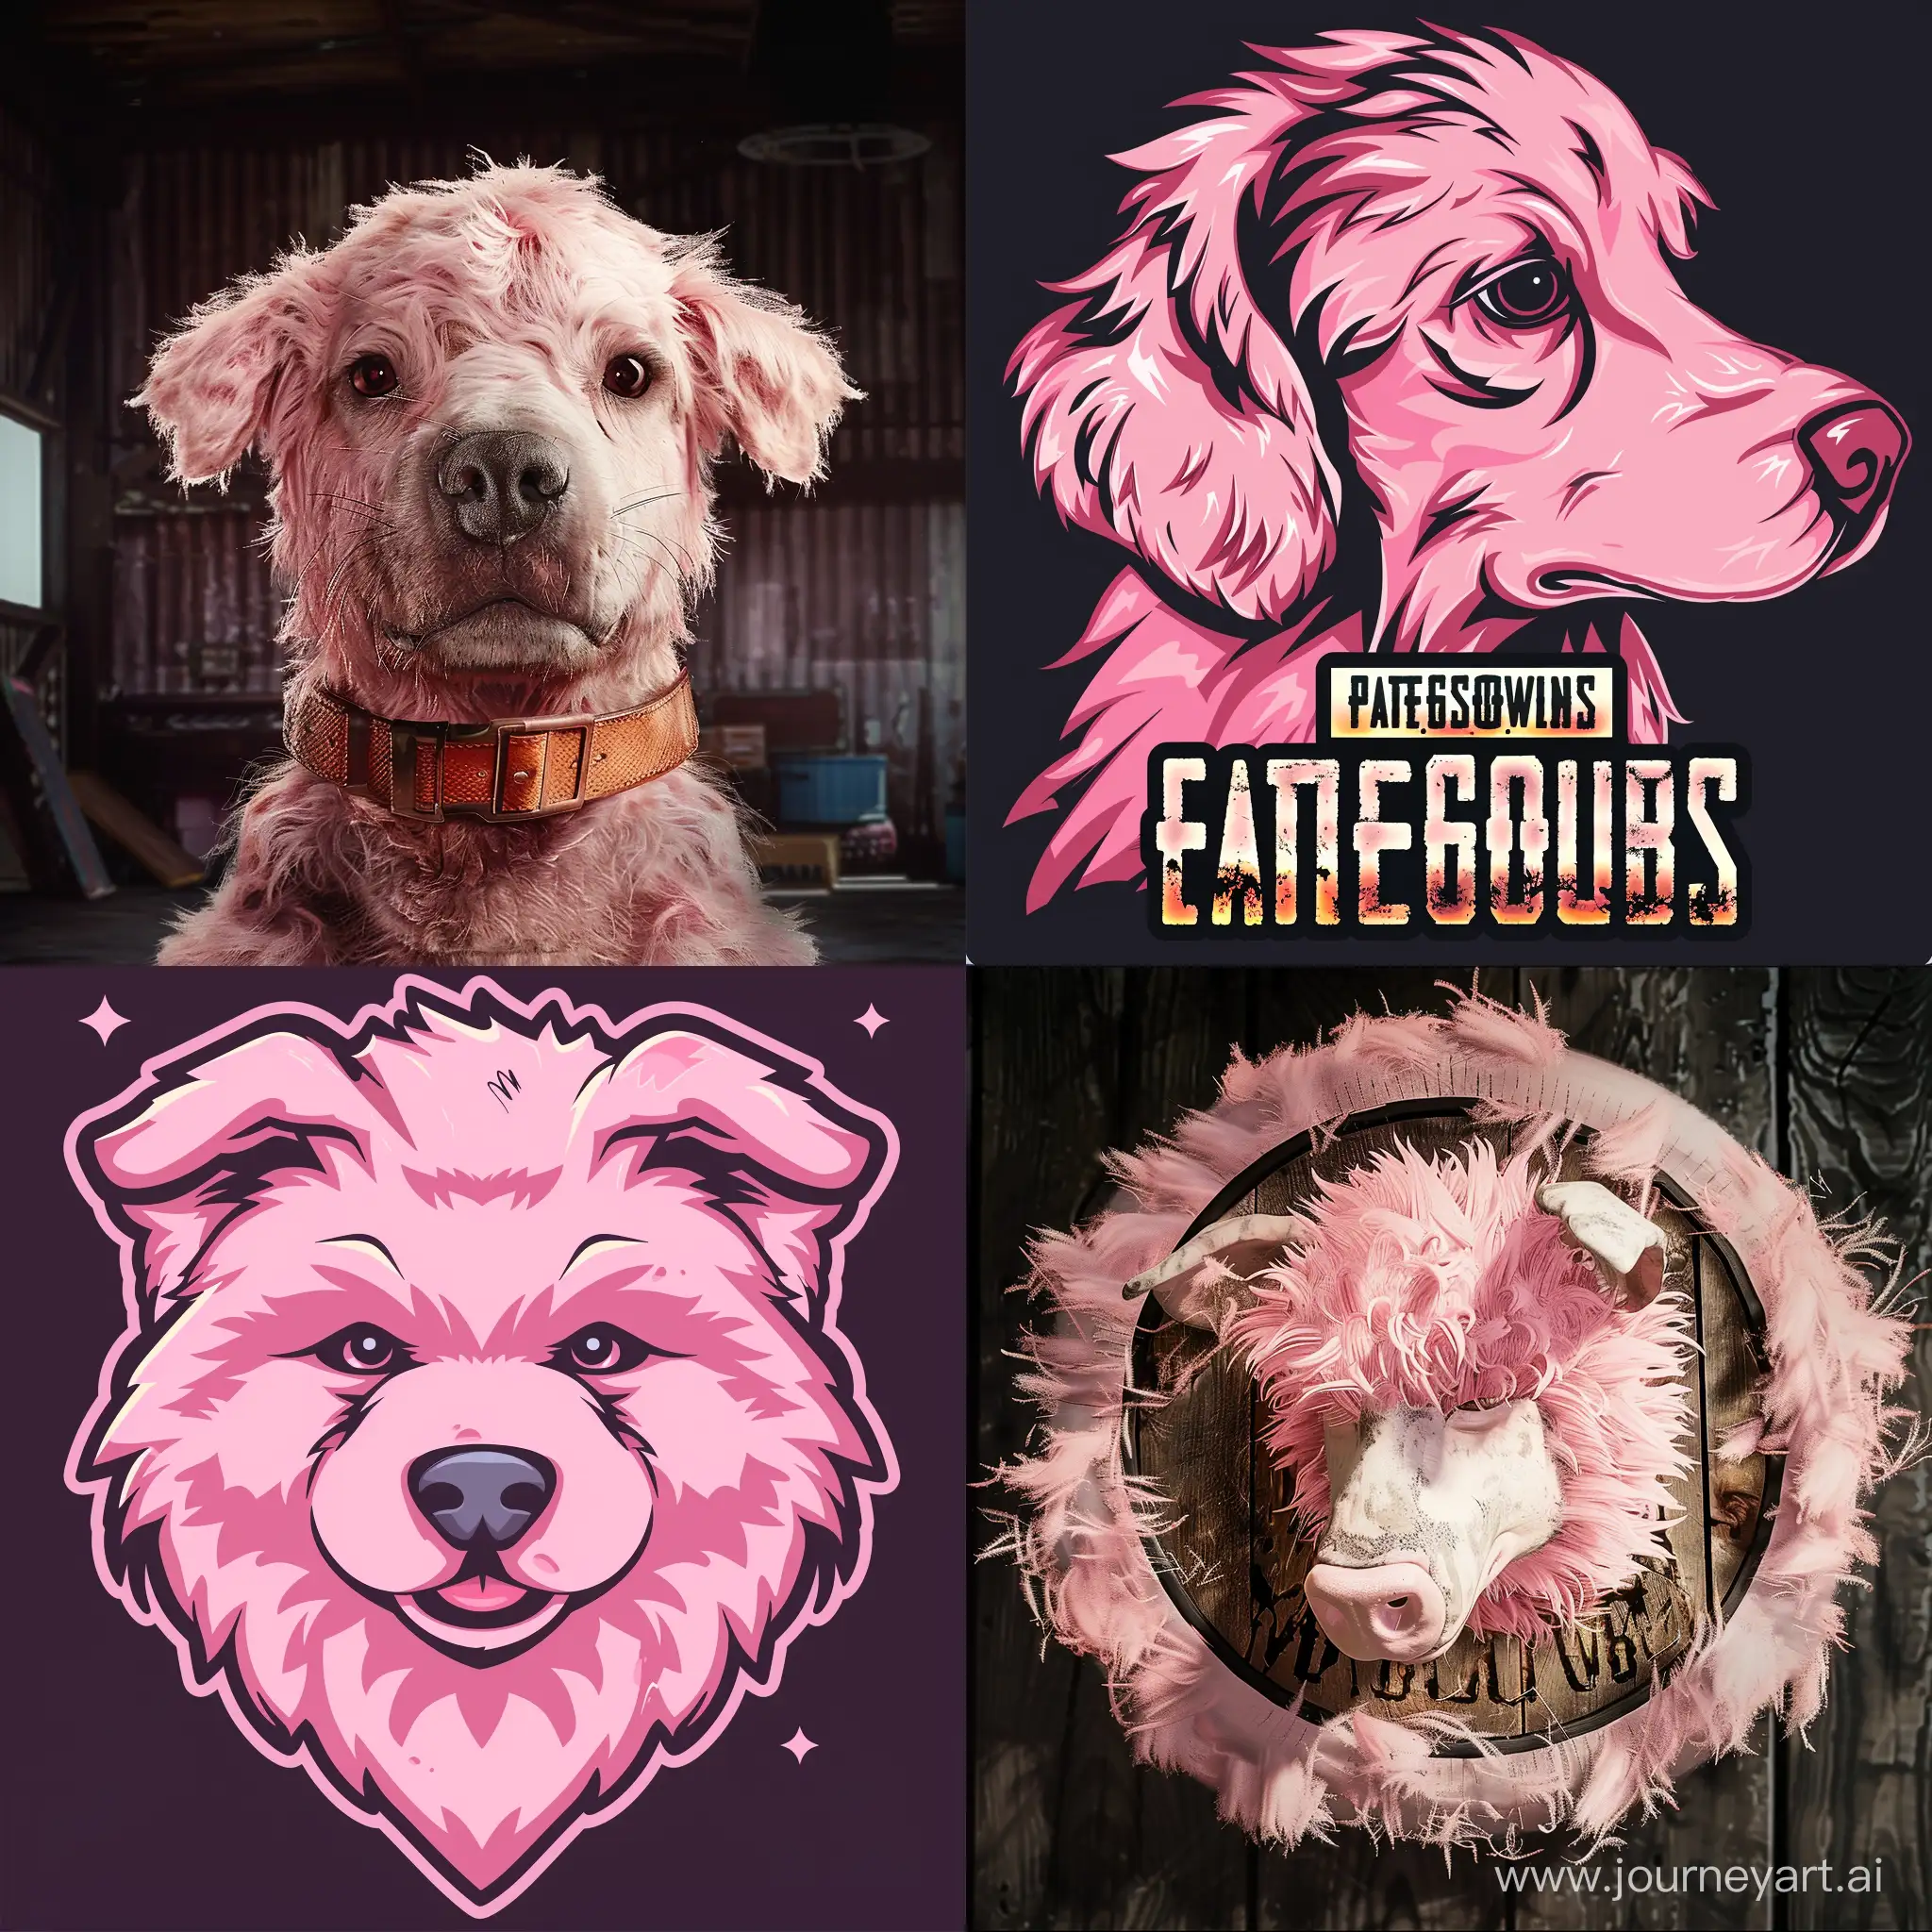 Pubg mobile logo with pink furry dog with the caption Milk_ShowGame